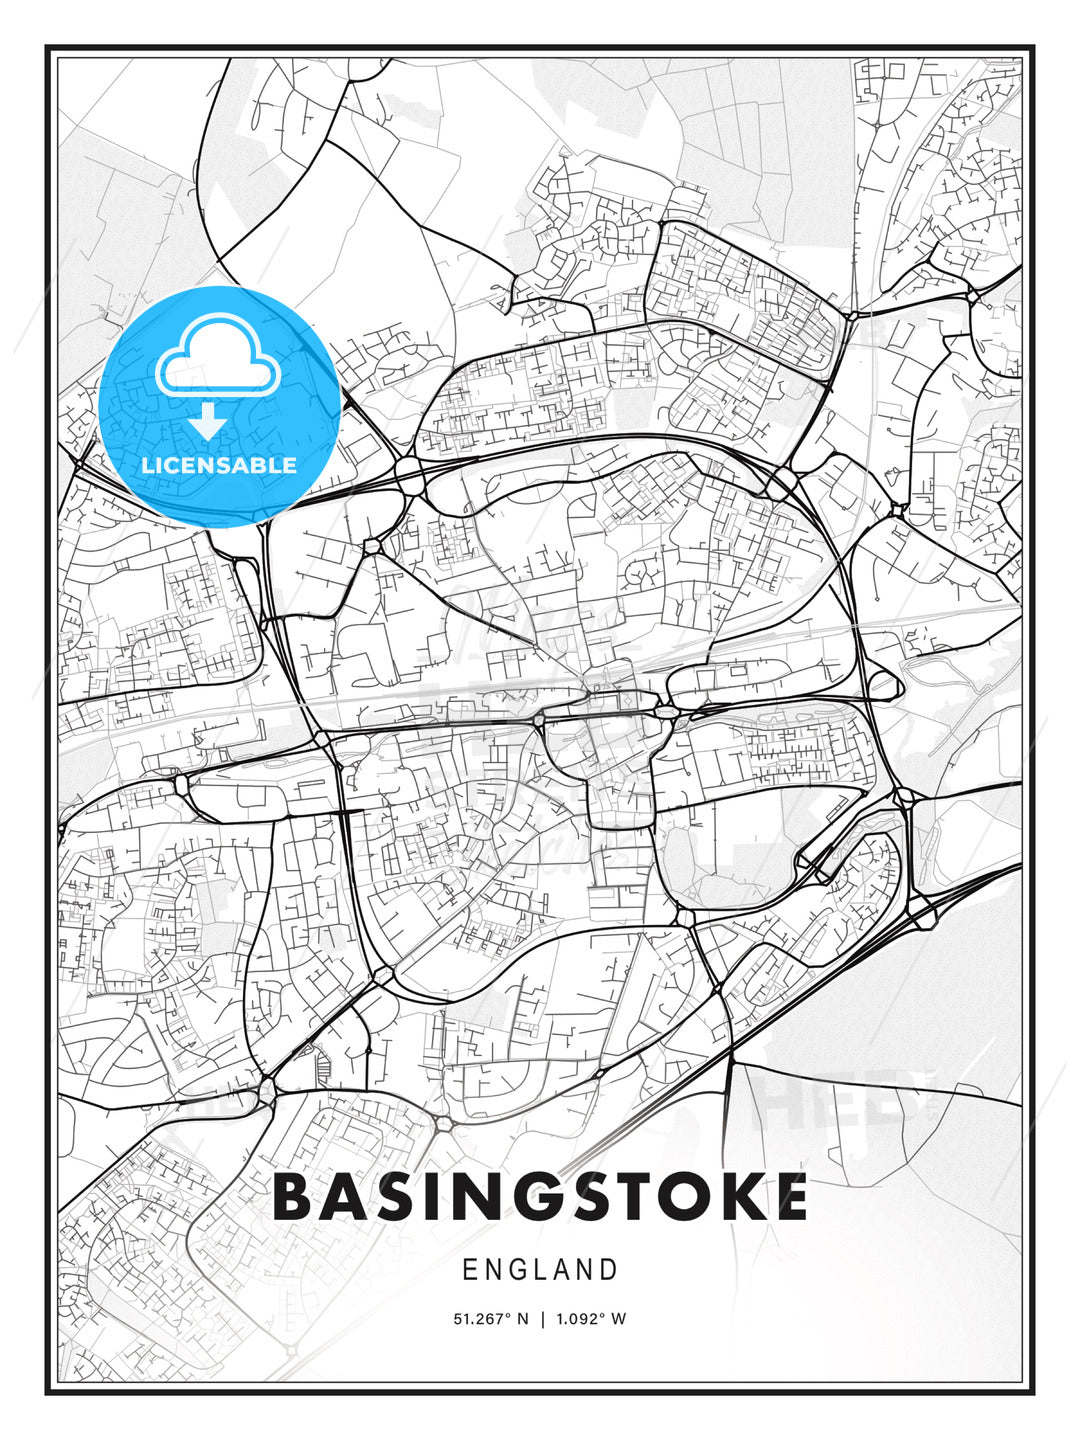 Basingstoke, England, Modern Print Template in Various Formats - HEBSTREITS Sketches